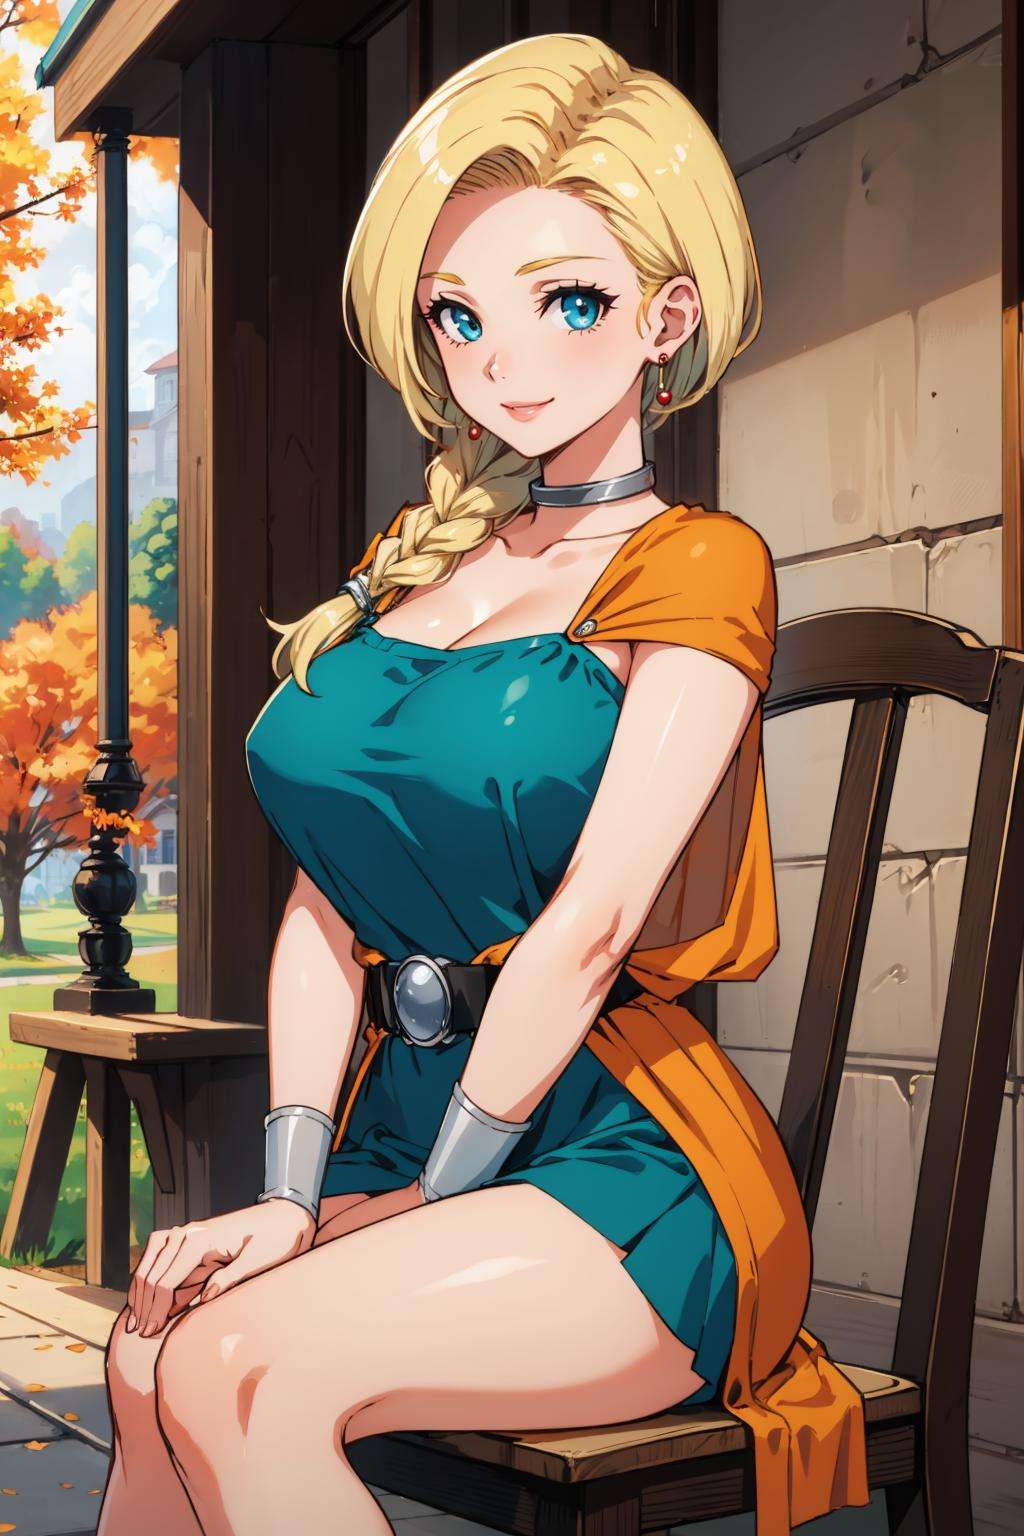 masterpiece, best quality, dqBianca, single braid, earrings, choker, orange cape, green dress, belt, looking at viewer, large breasts, sitting, chair, porch, autumn, smile <lora:dqbianca-nvwls-v1-000010:0.9>